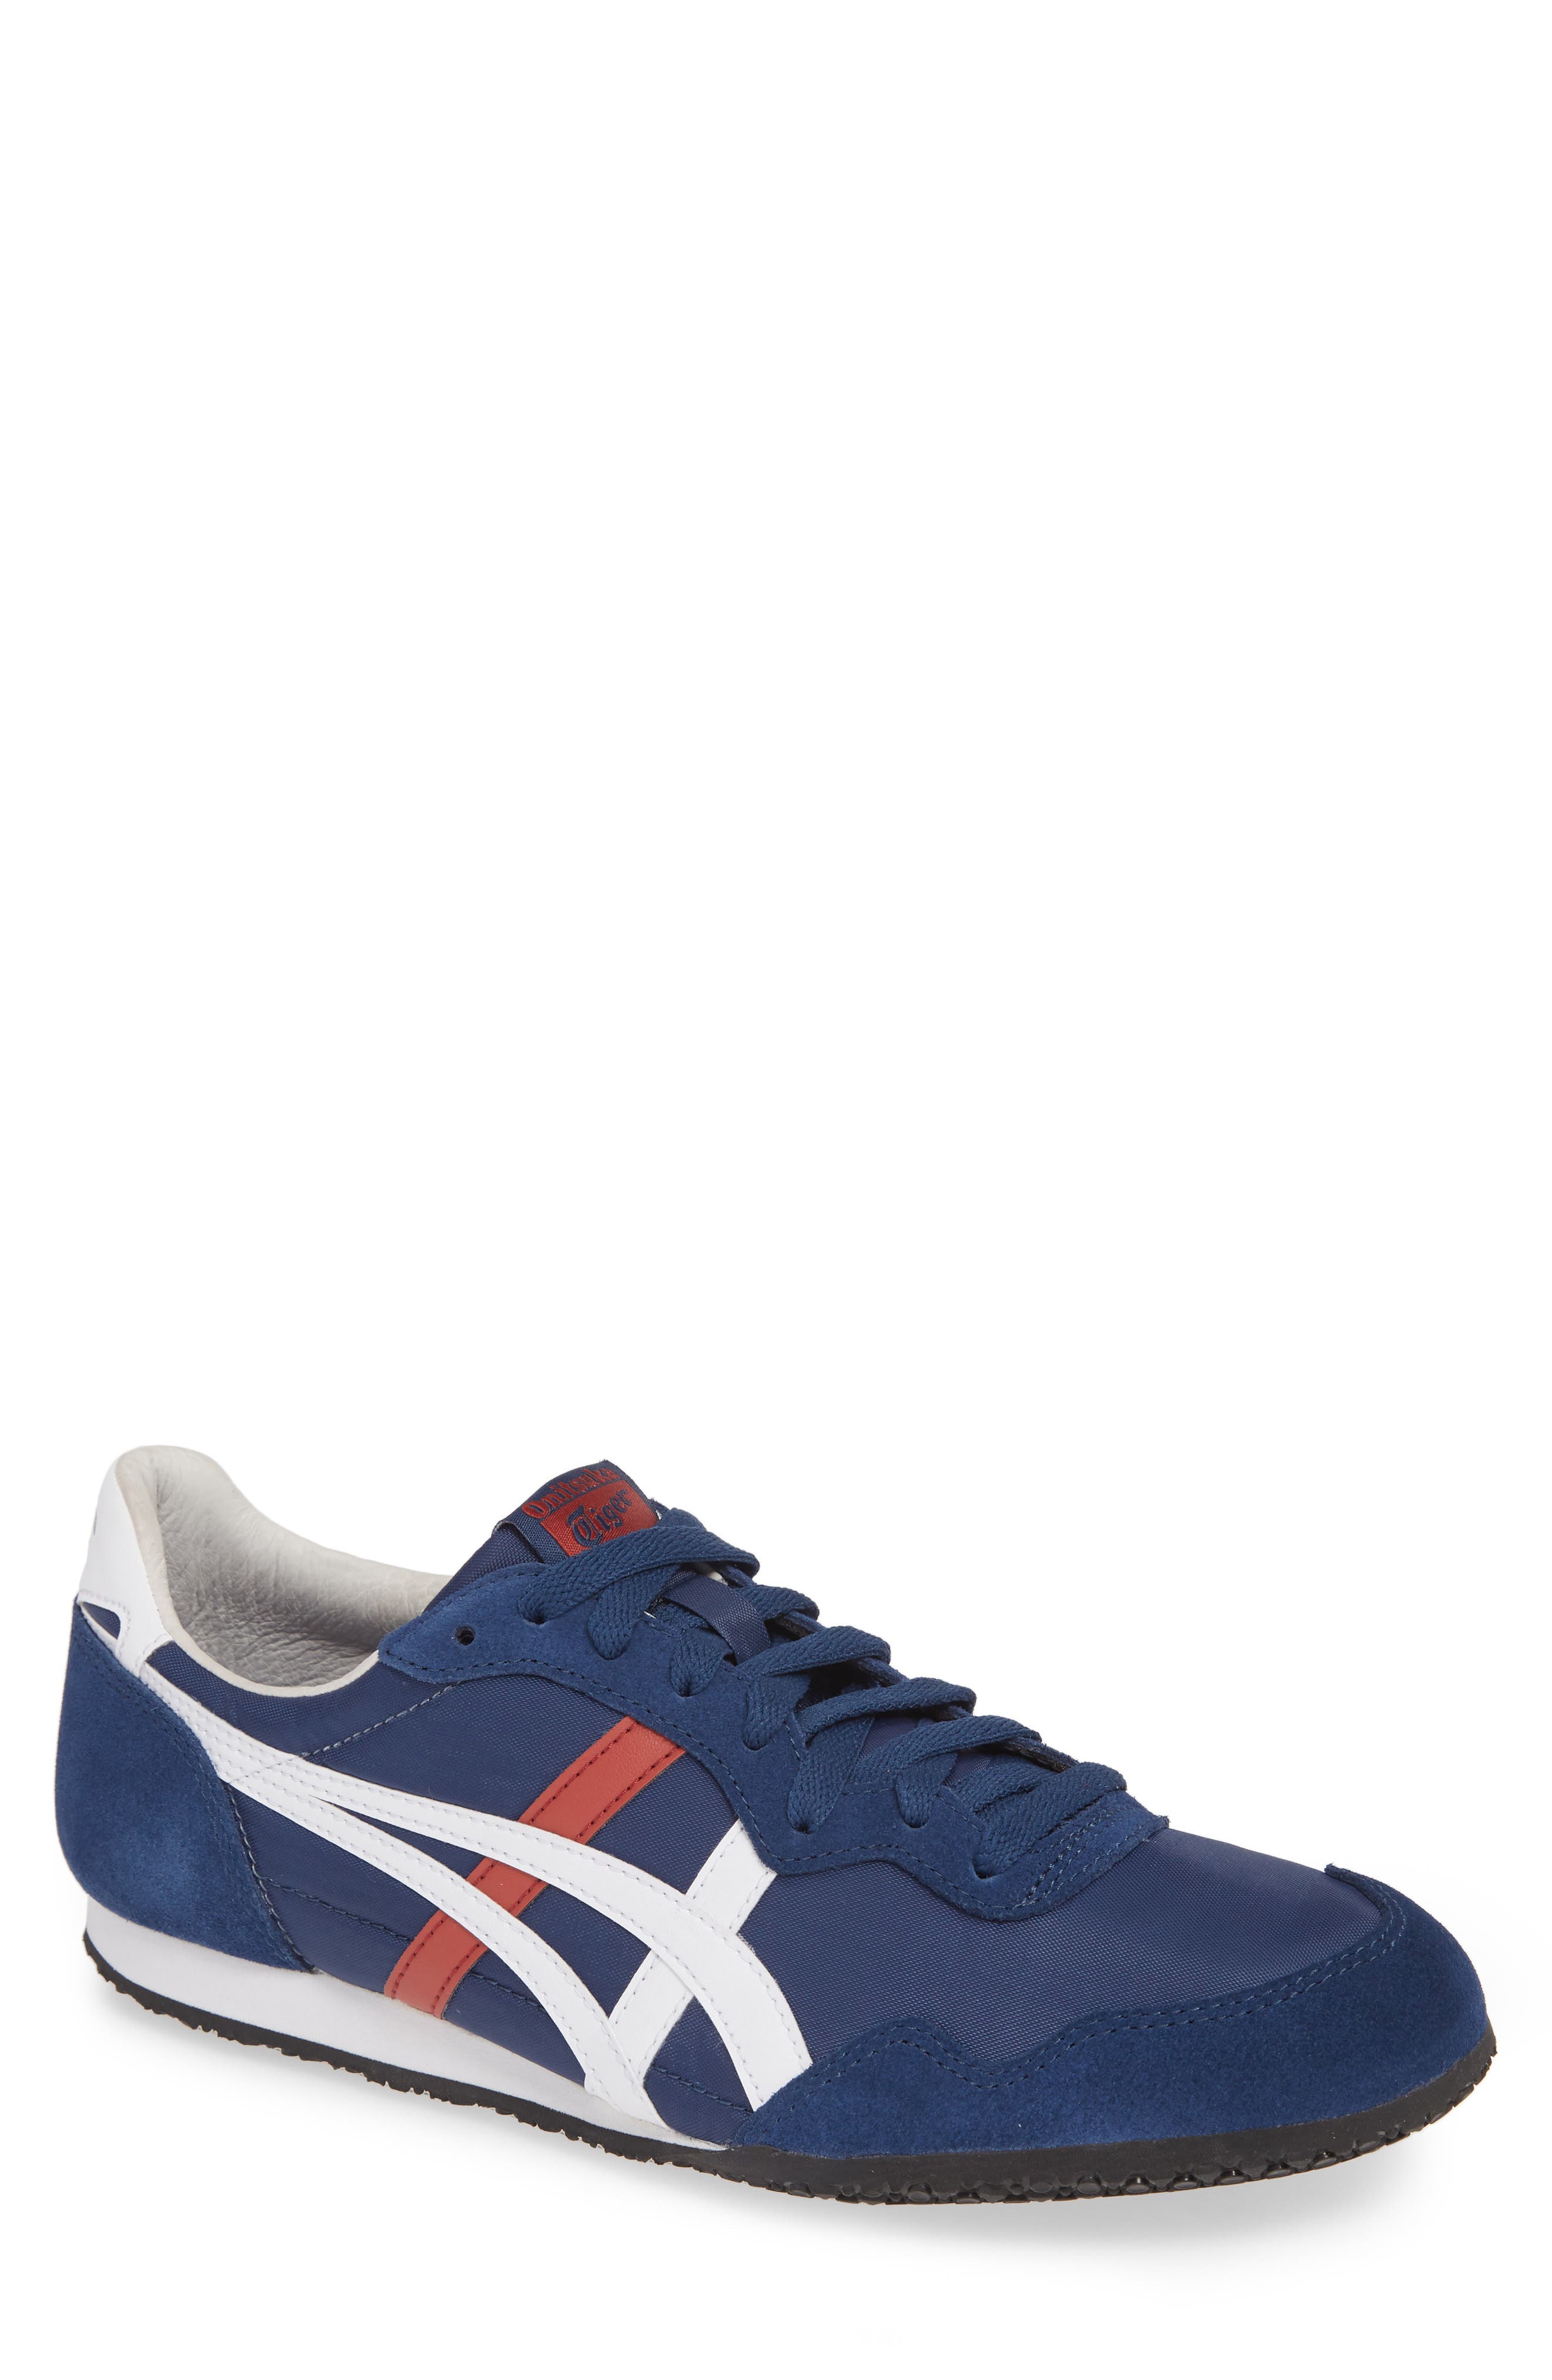 onitsuka tiger cyber monday Sale,up to 